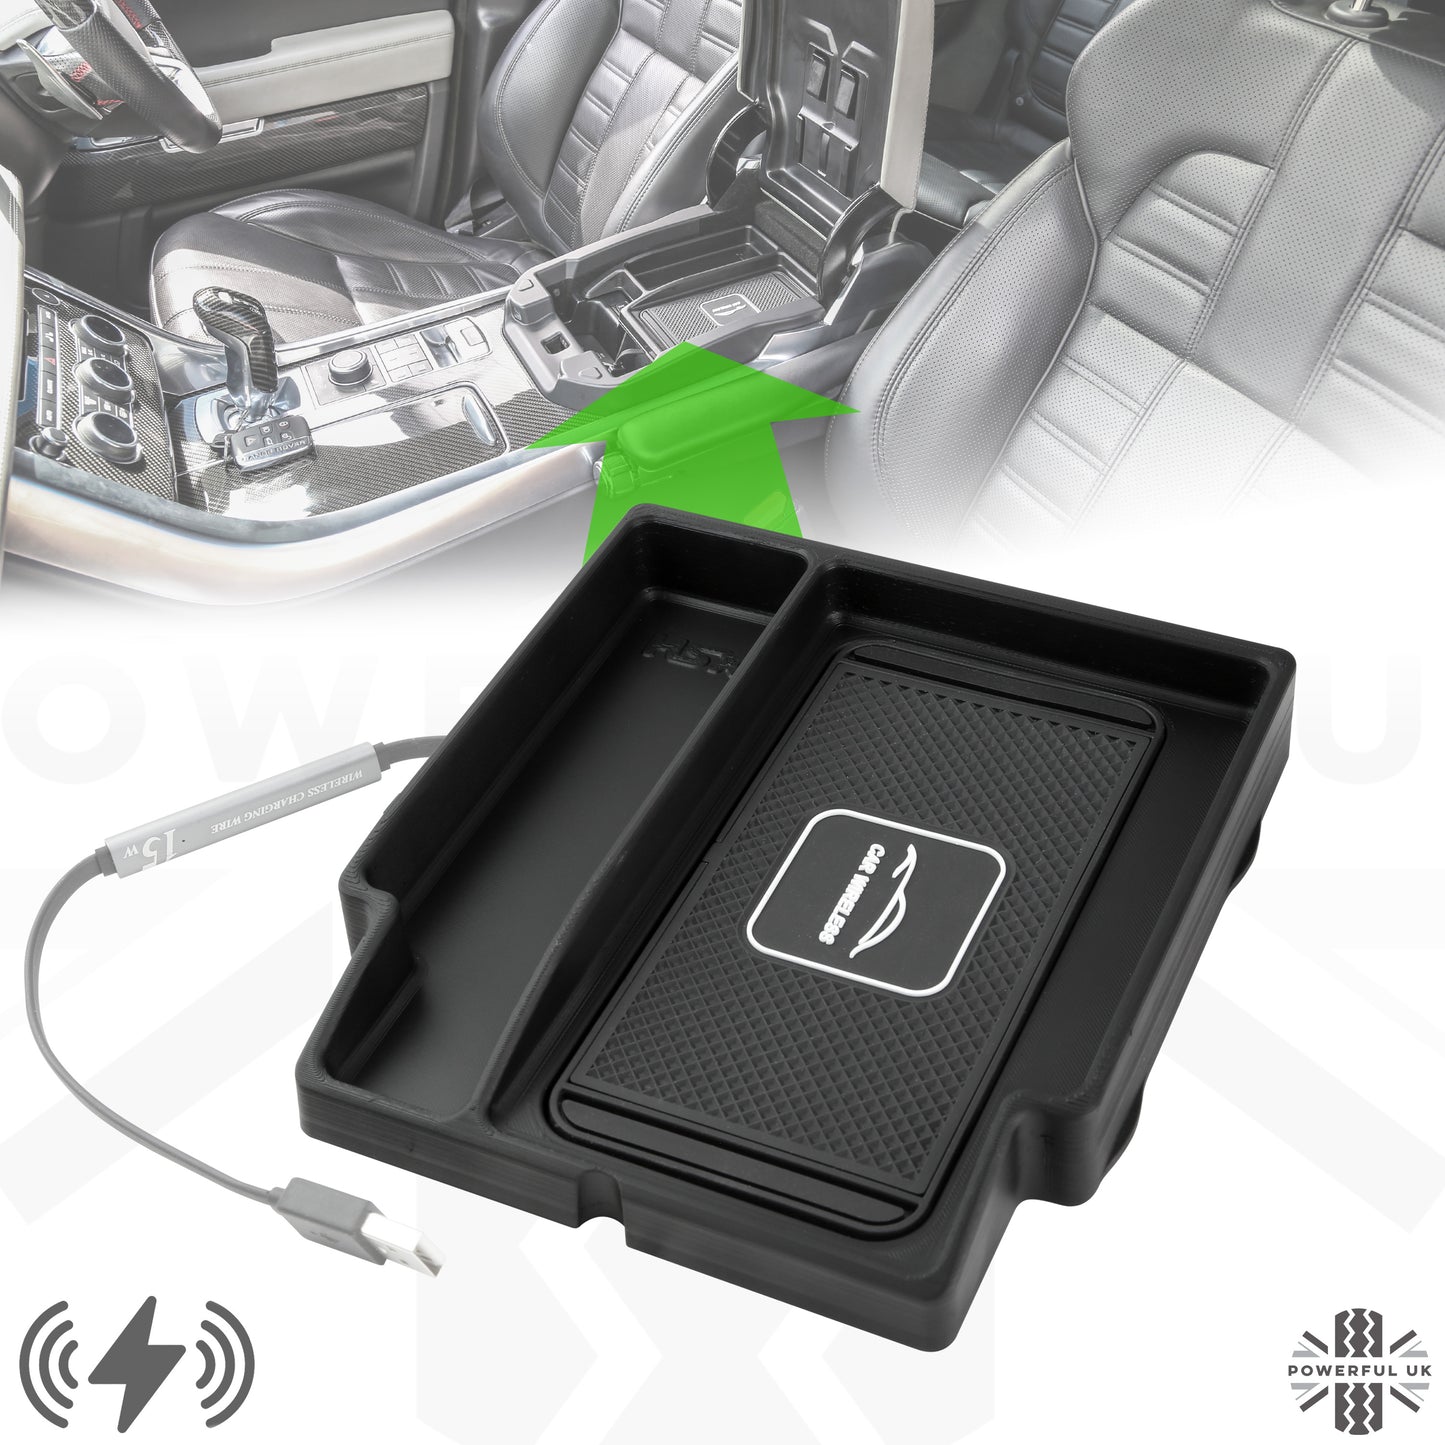 Wireless phone charging tray for Range Rover L405 2014-17 (for vehicles with NO fridge)